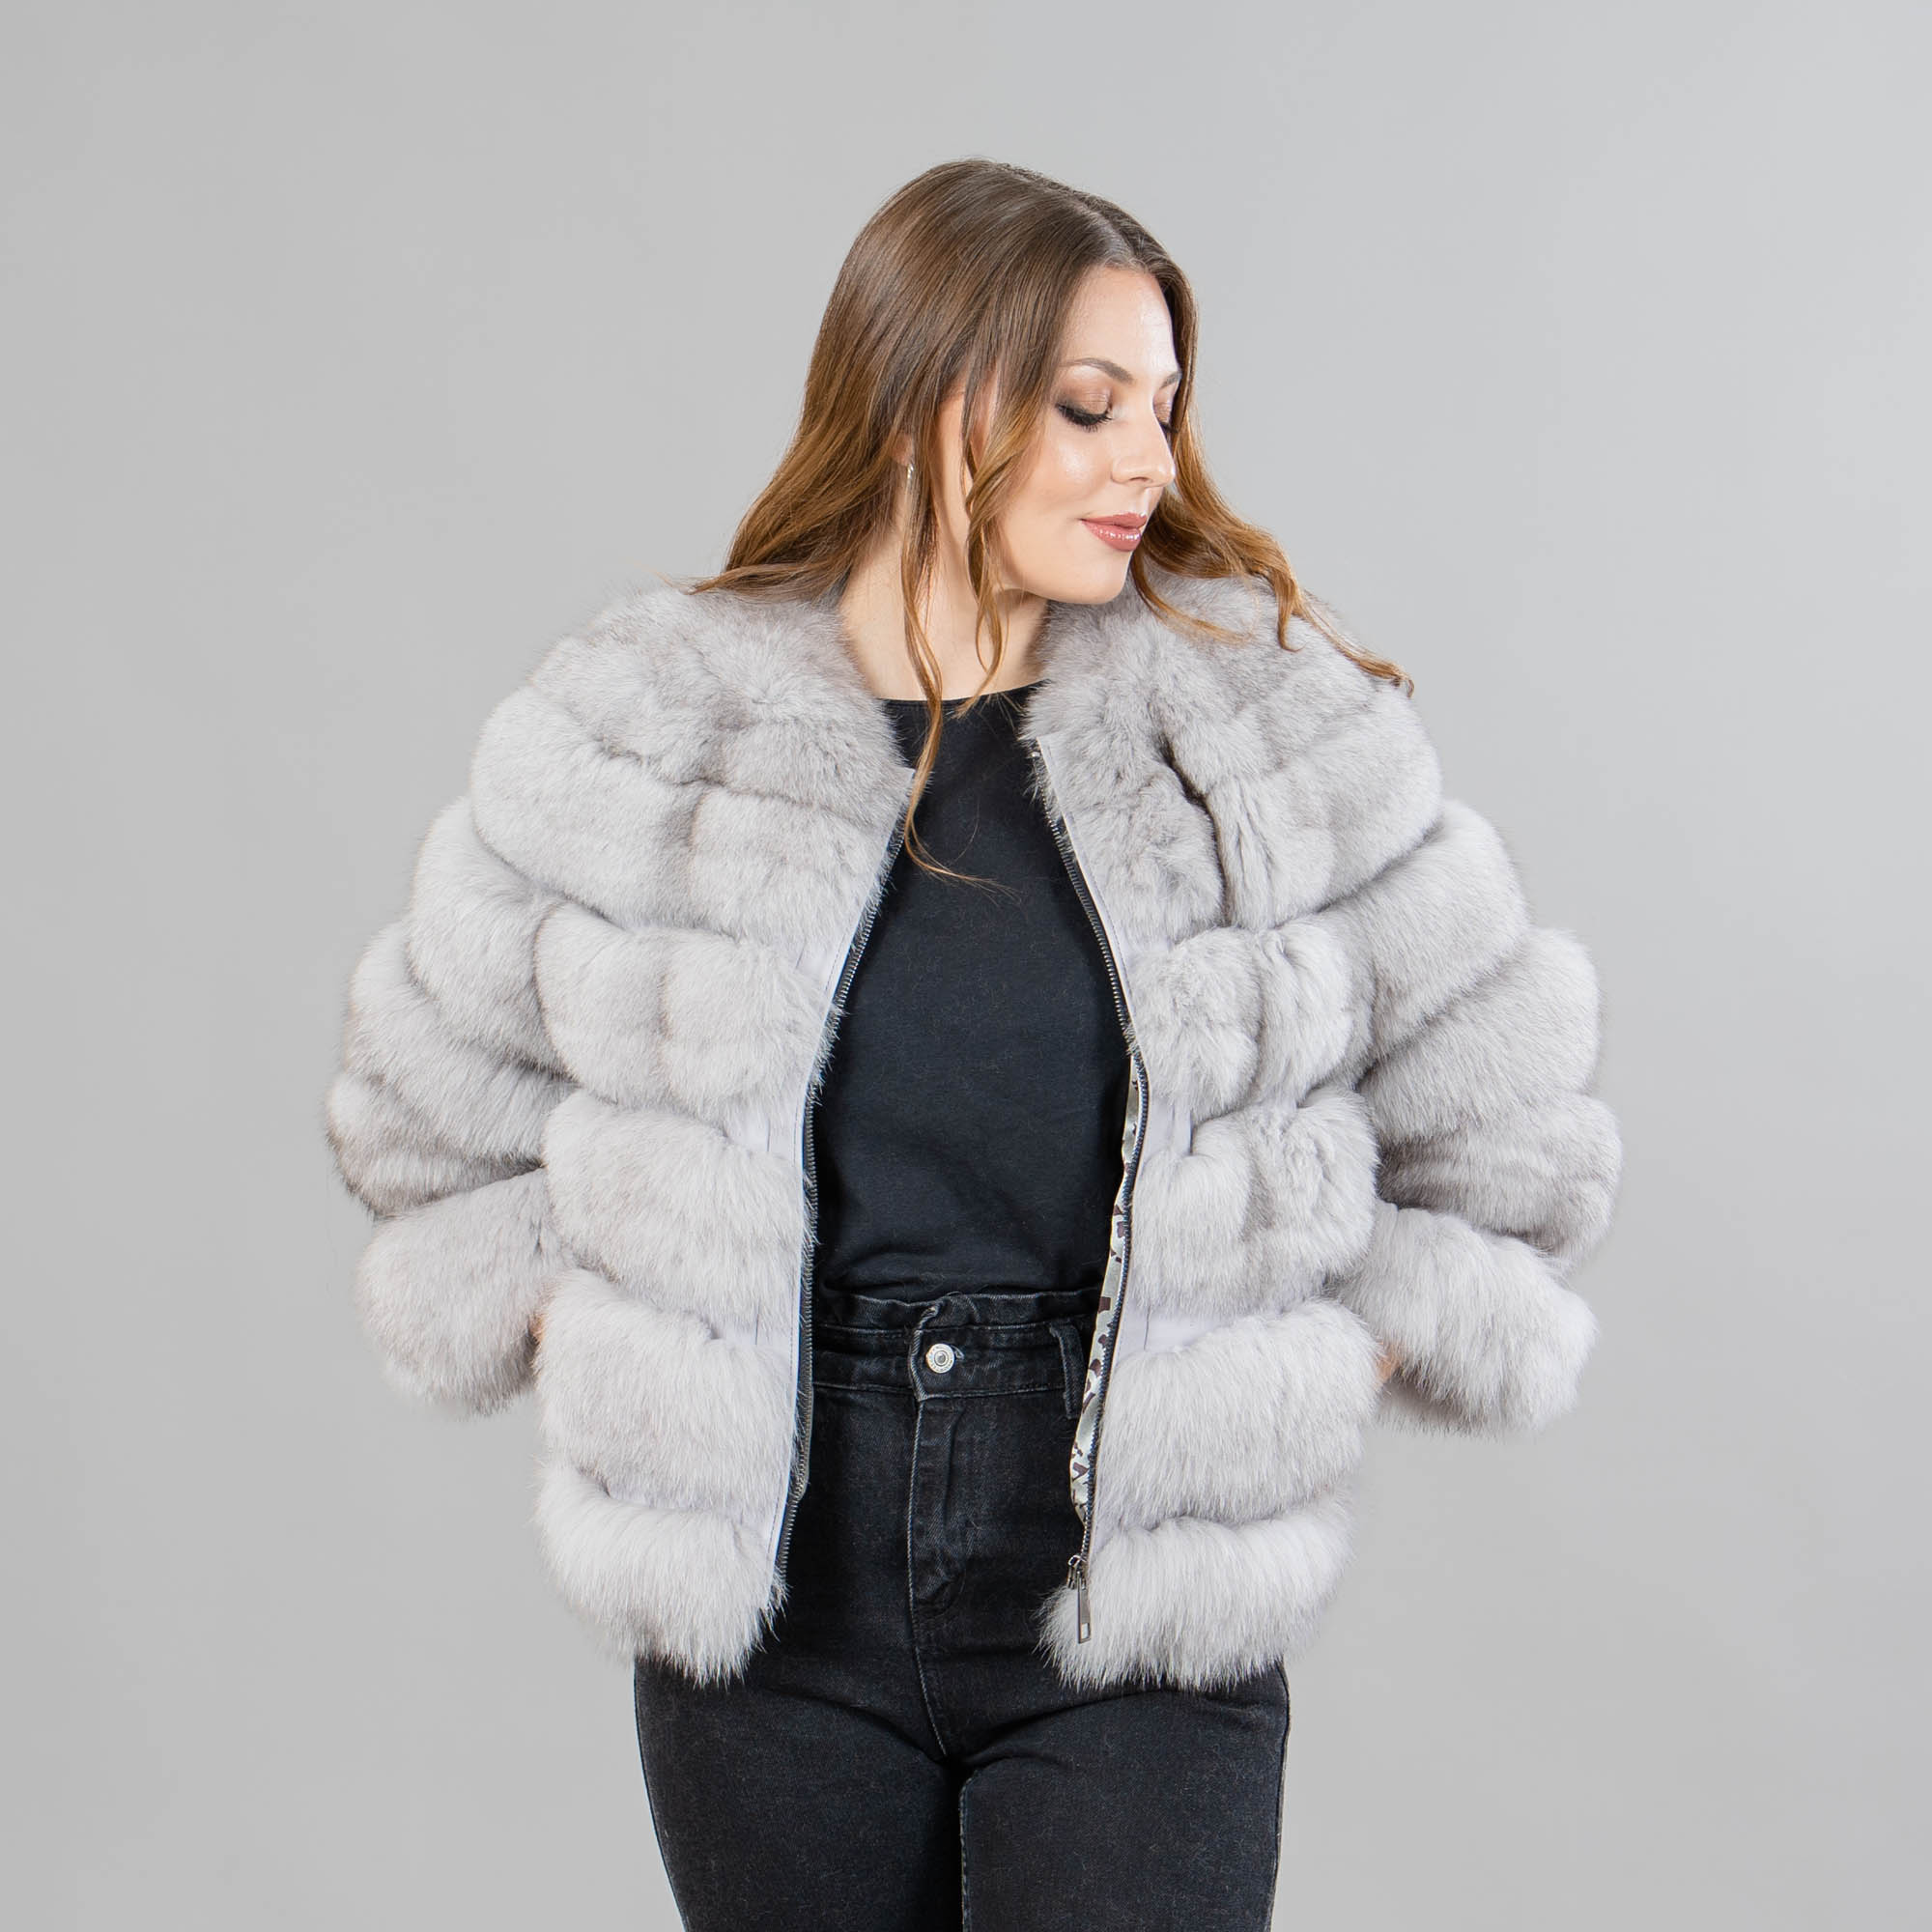 Fox fur jacket with leather details in gray color